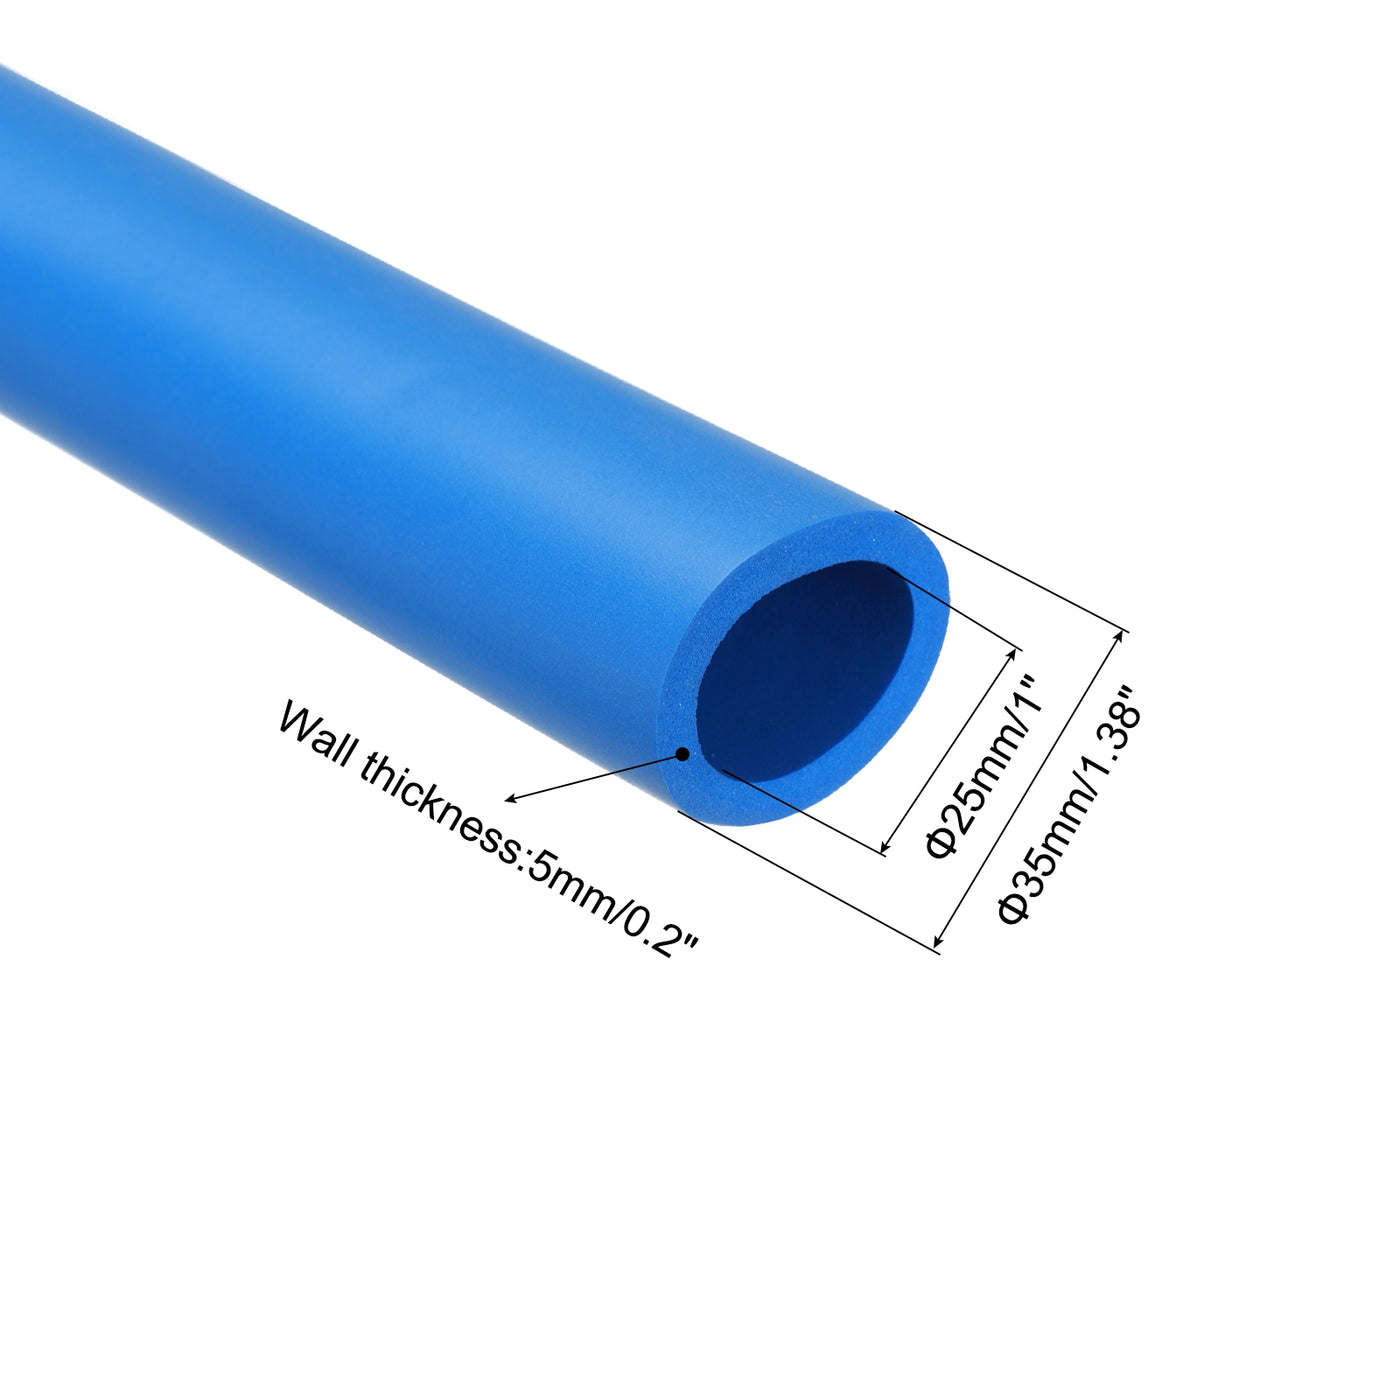 uxcell Uxcell 2pcs 3.3ft Pipe Insulation Tube 1 Inch(25mm) ID 35mm OD Foam Tubing for Handle Grip Support, Blue